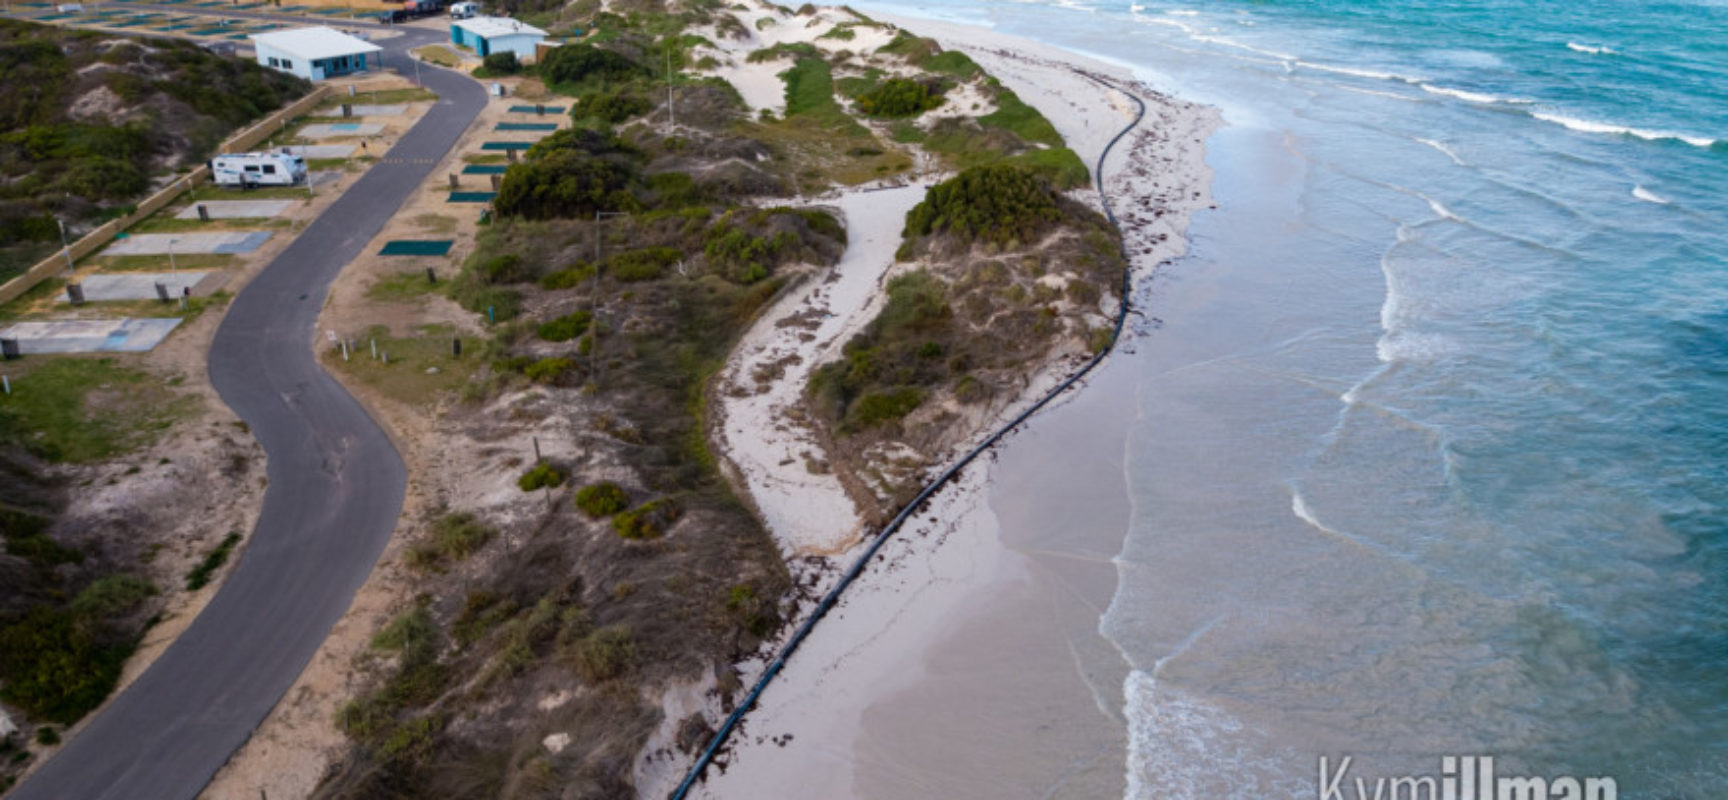 NO MORE VEHICULAR ACCESS TO EDWARDS ISLAND POINT